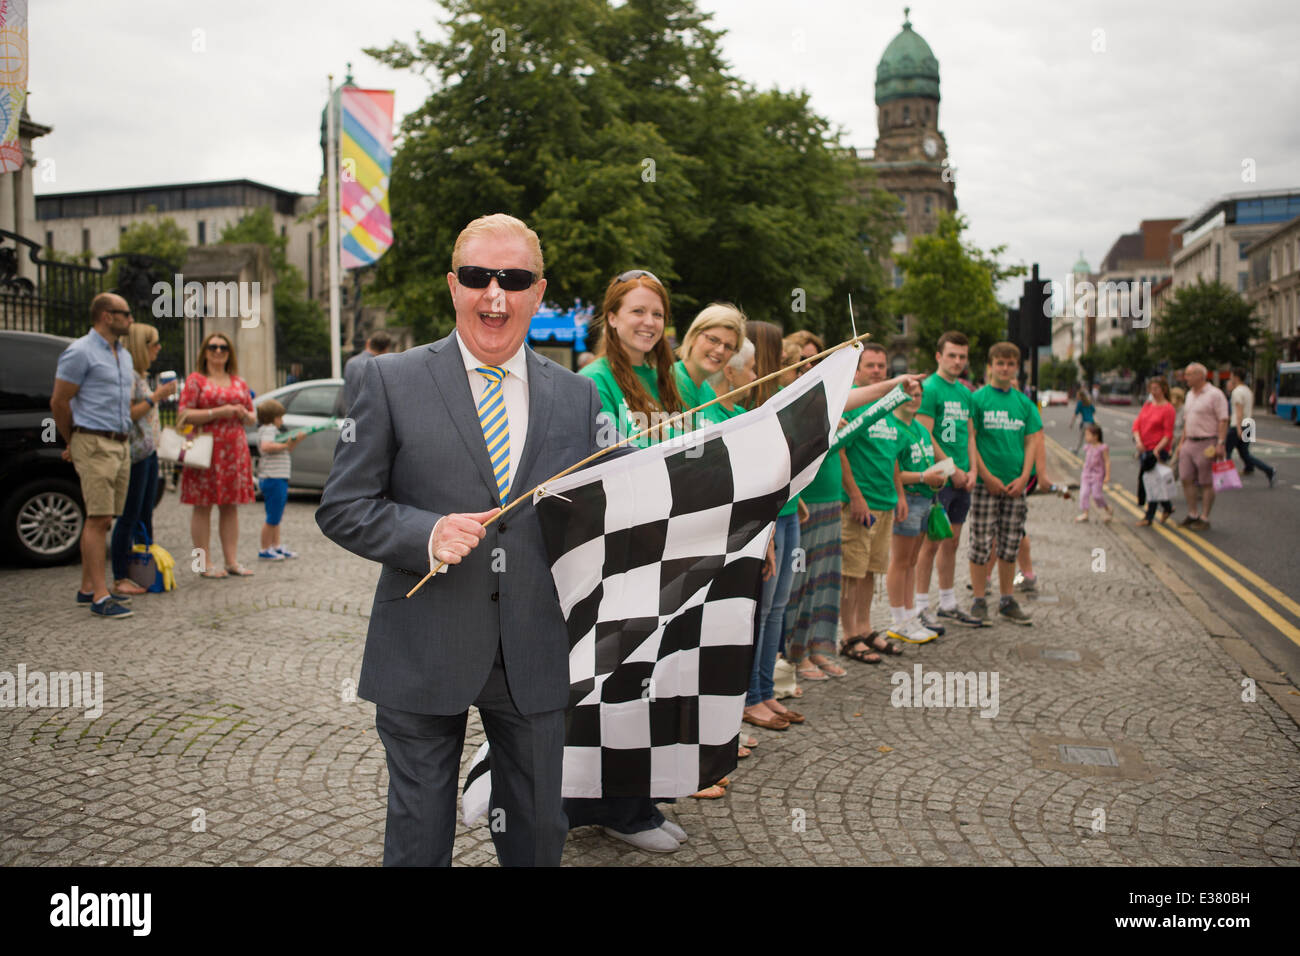 Belfast City Hall,UK. 22nd June 2014. Celebrity Julian Simmons with checkered flag at the finish line of the 6 Marathons in 6 Countries in 6 Days. Macmillan Cancer support was the Charity fior the runners who took part Stock Photo